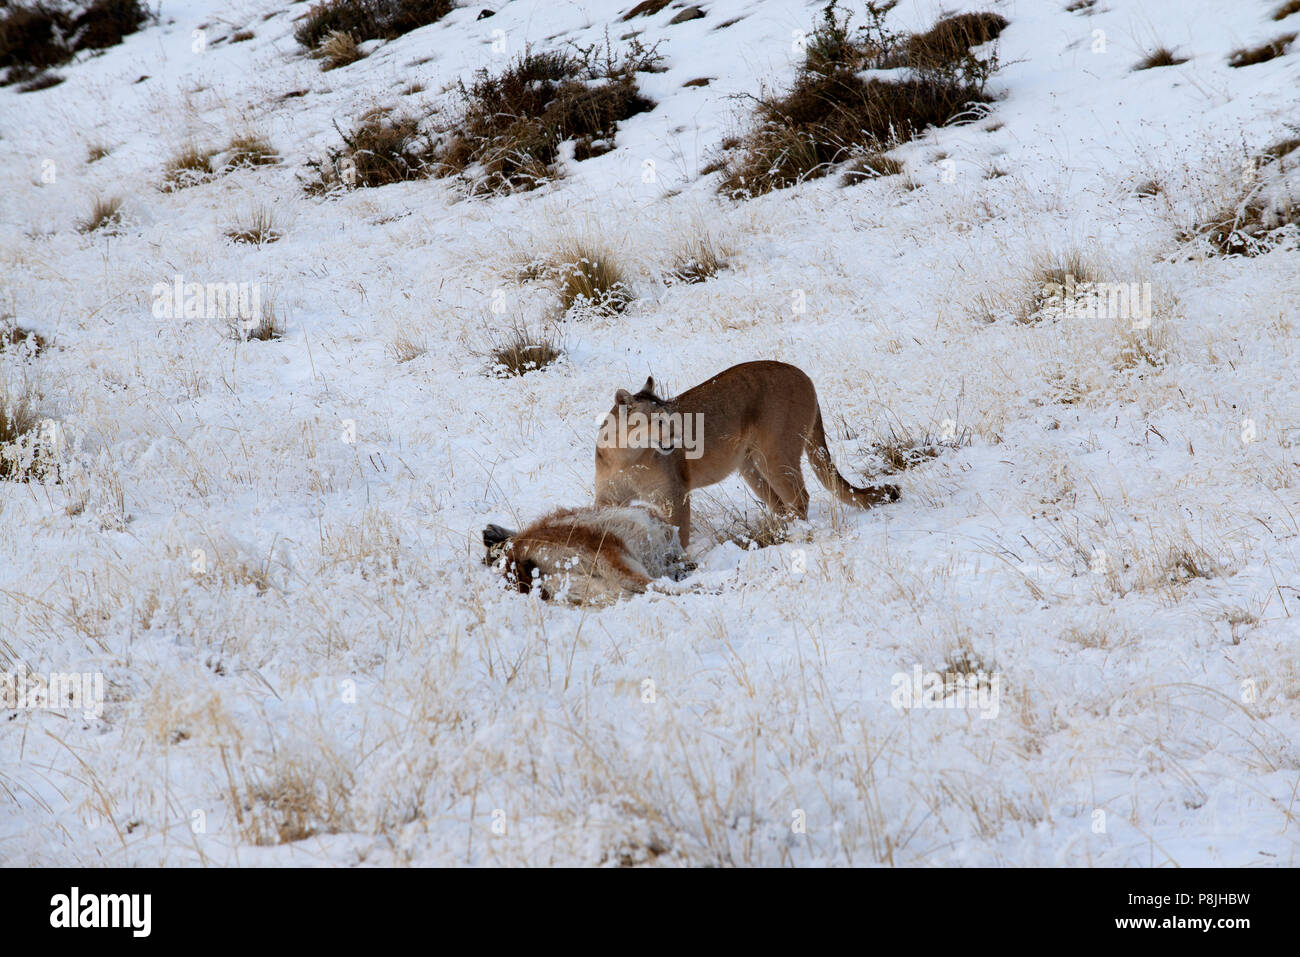 Wild female Patagonian Puma in winter landscape standing next to carcass of young Guanaco she has just killed, Stock Photo